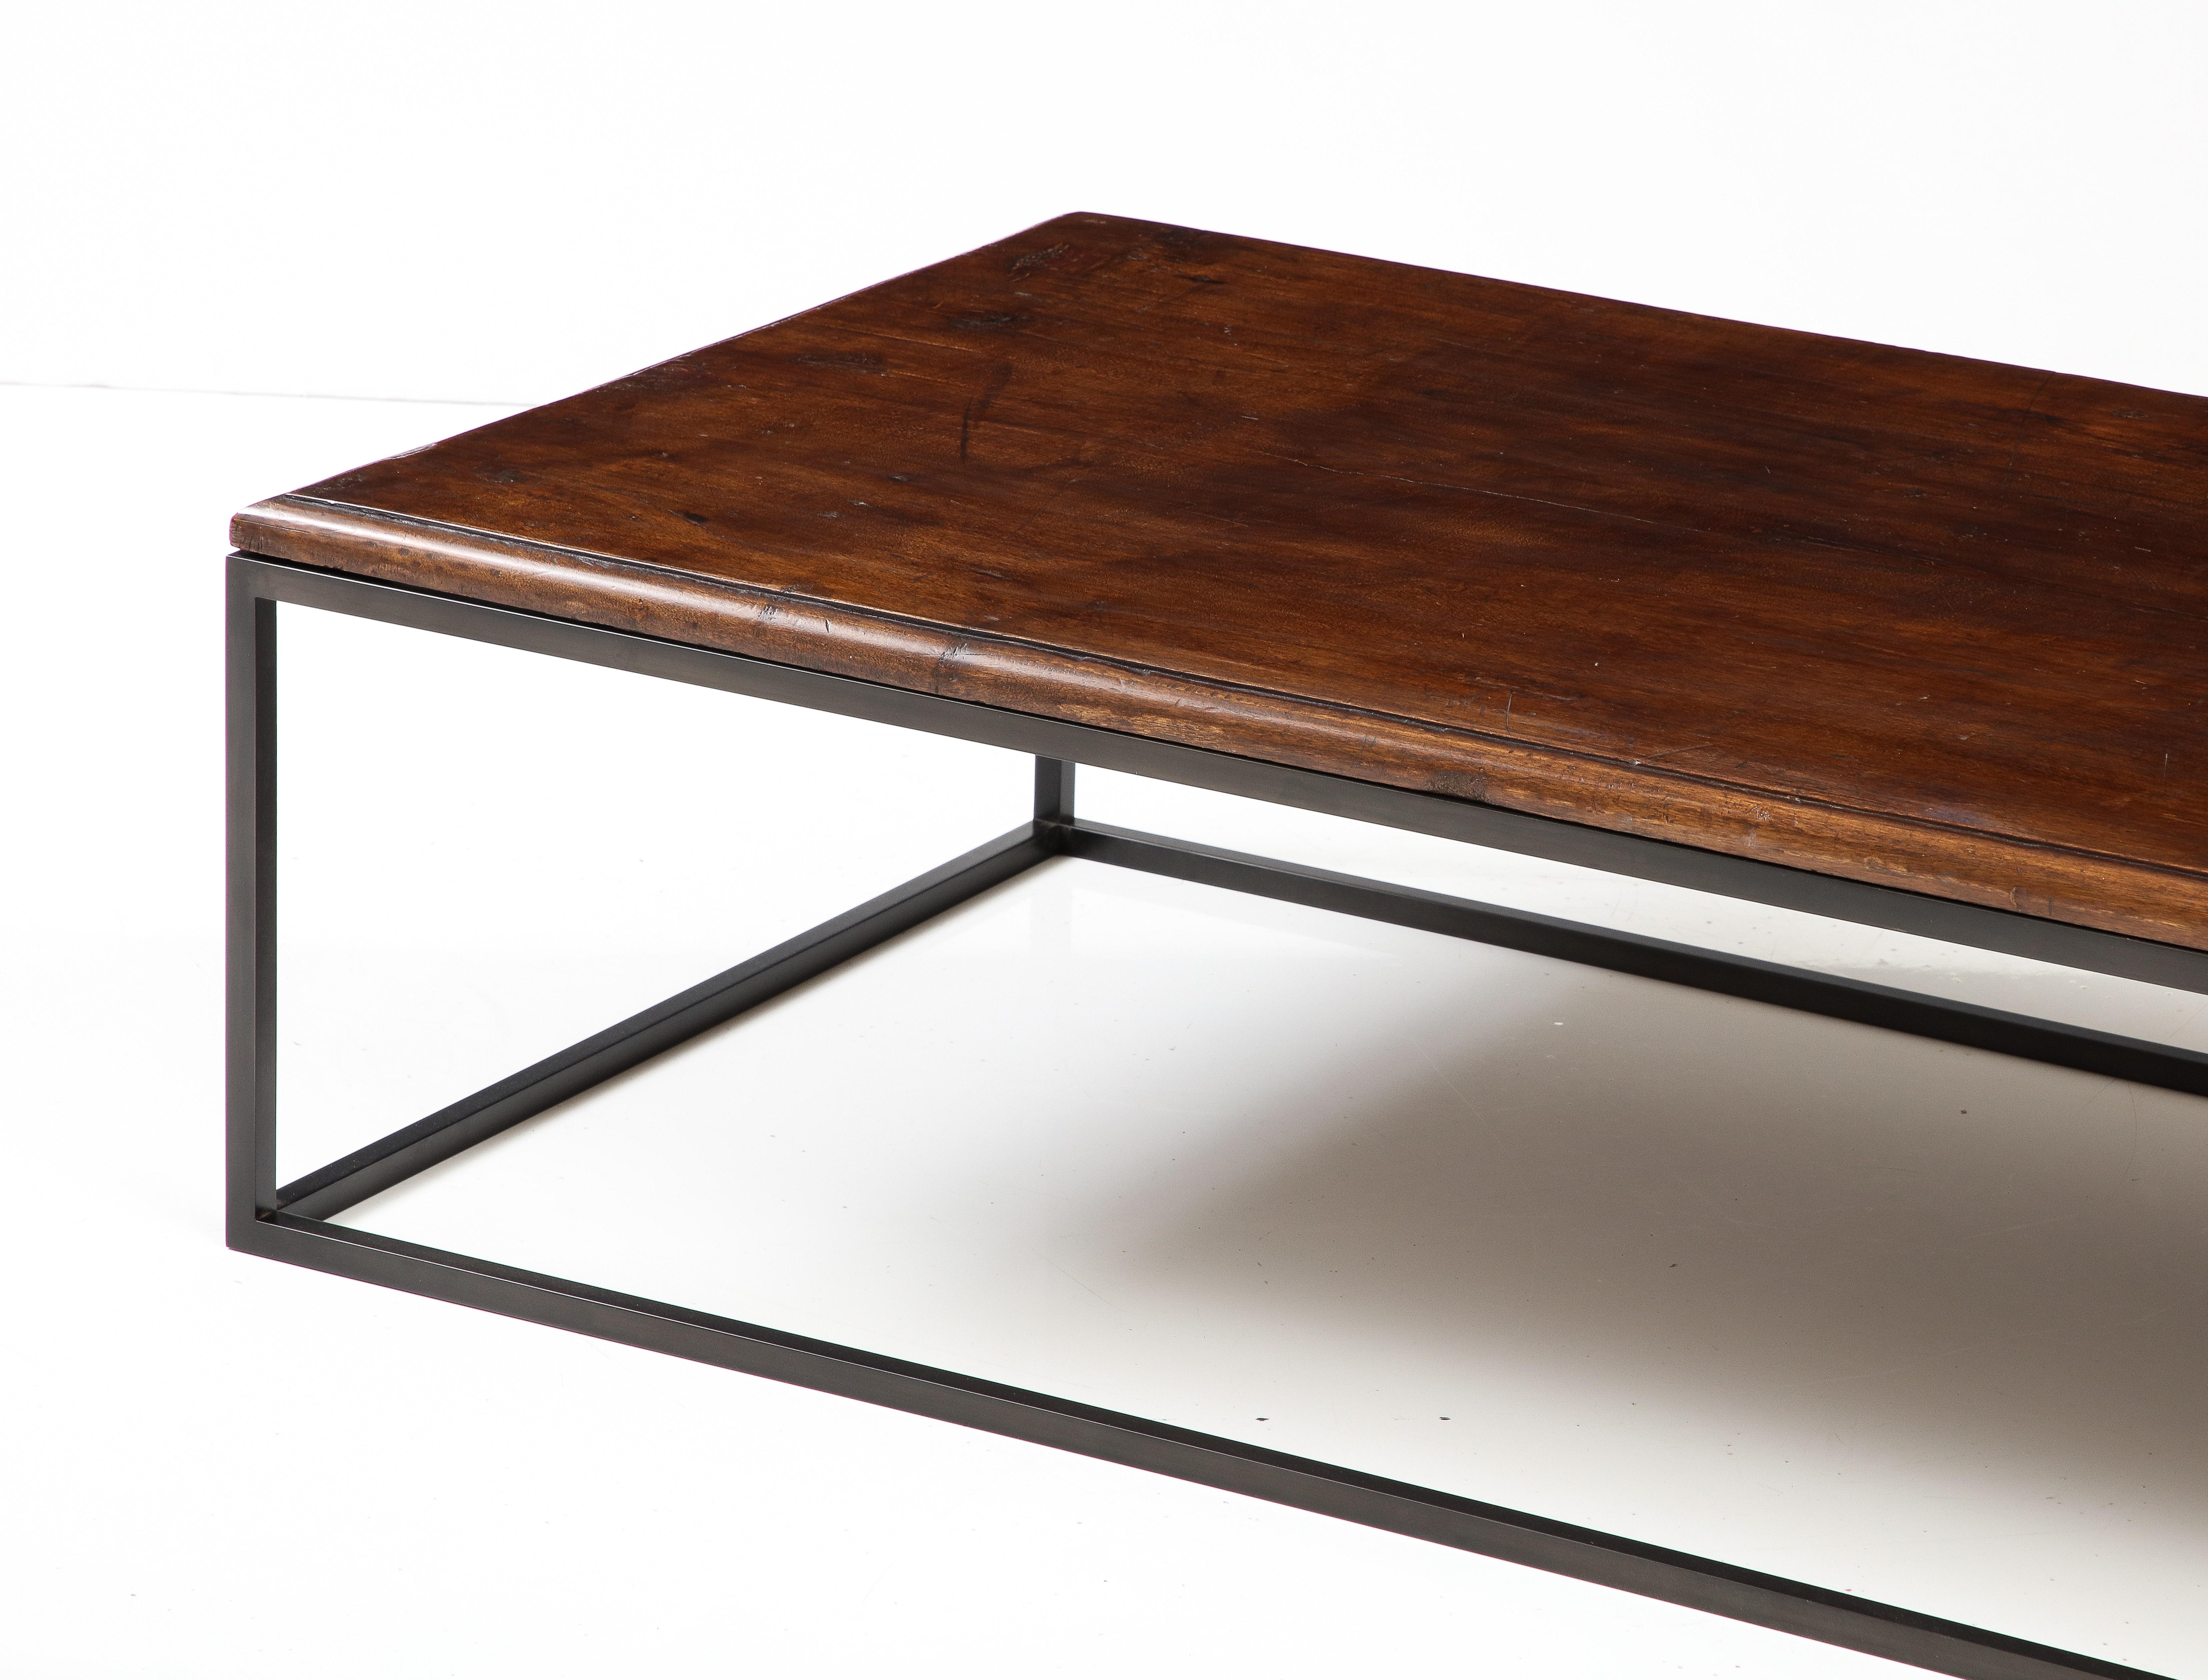 Minimalist 18th C. Italian Dark Walnut Coffee Table in One Thick Piece with Edge Detail For Sale